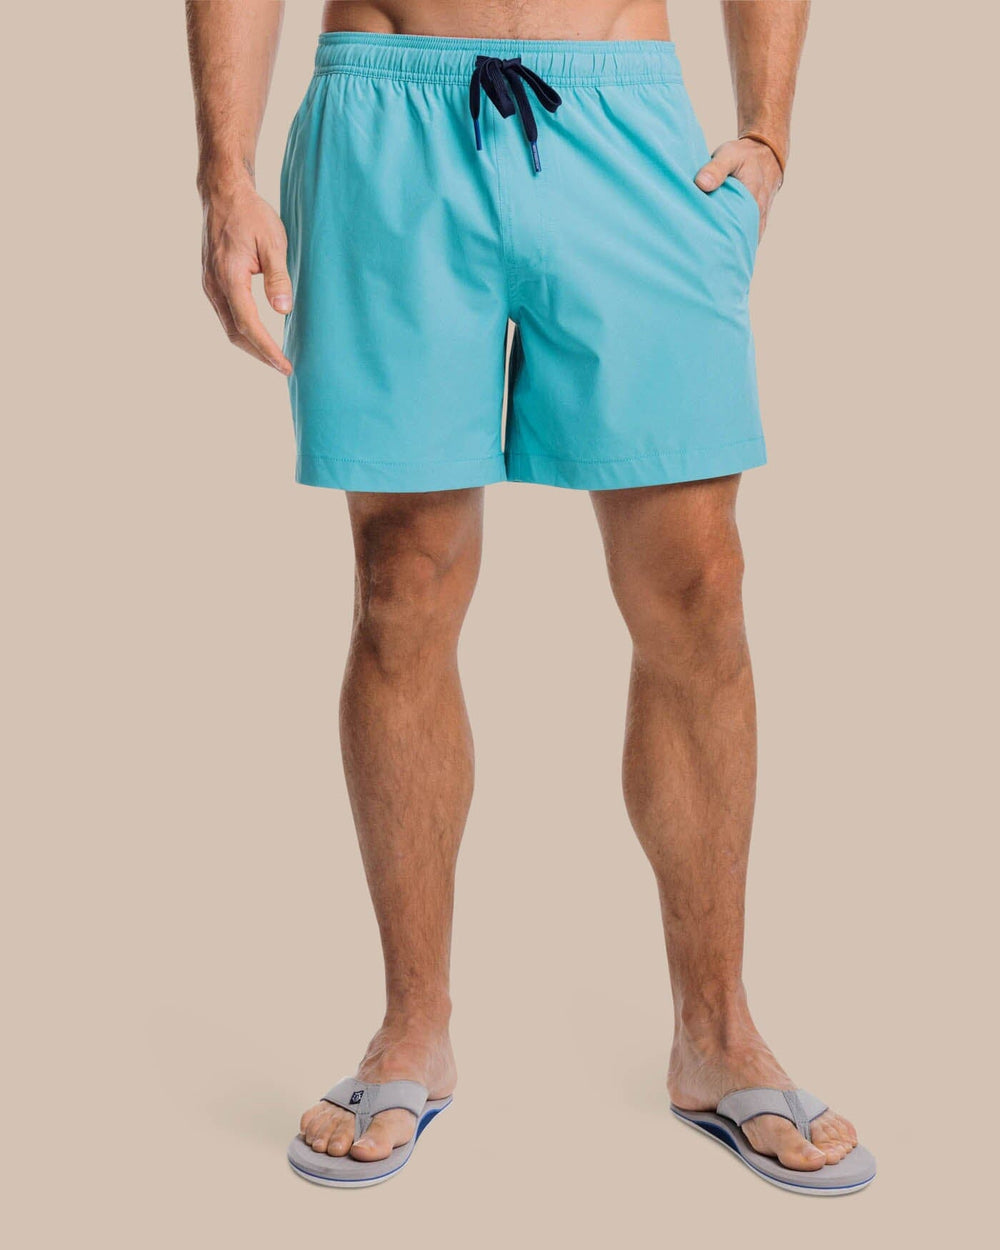 The front view of the Southern Tide Solid Swim Trunk 3 by Southern Tide - Tidal Wave